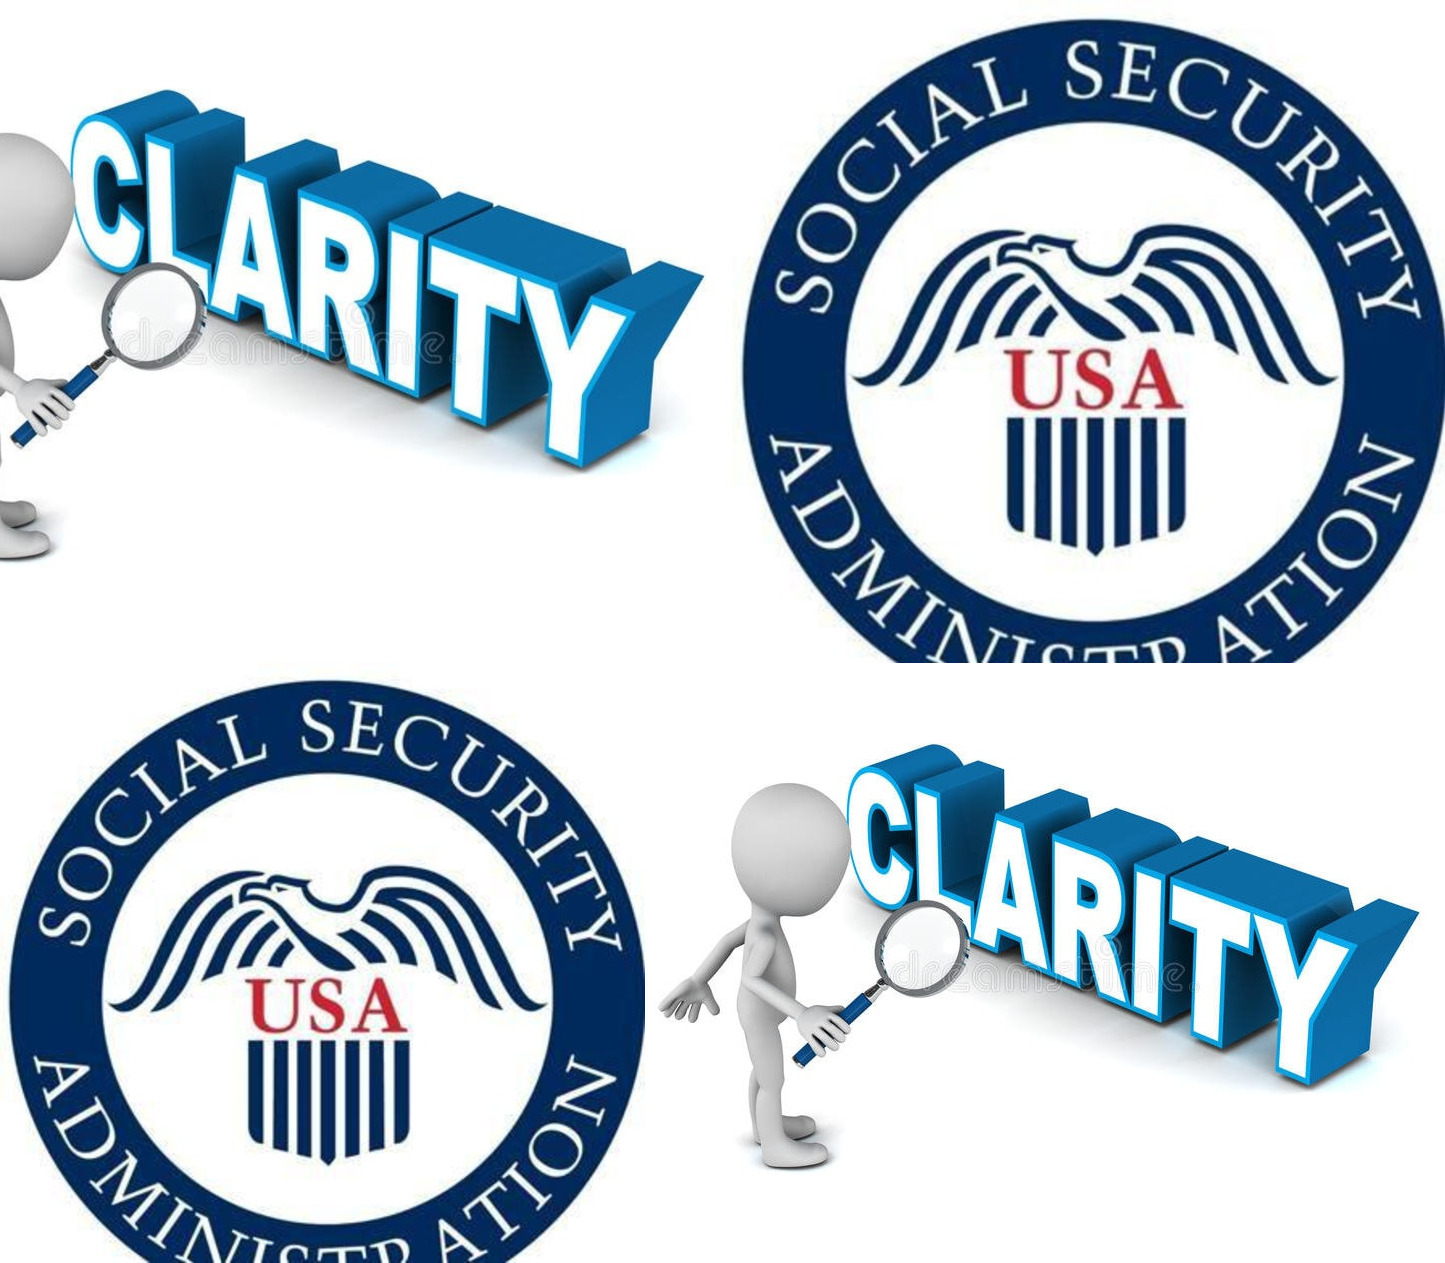 Social Security Offers You Clarity About Your Account 'In Plain Language'